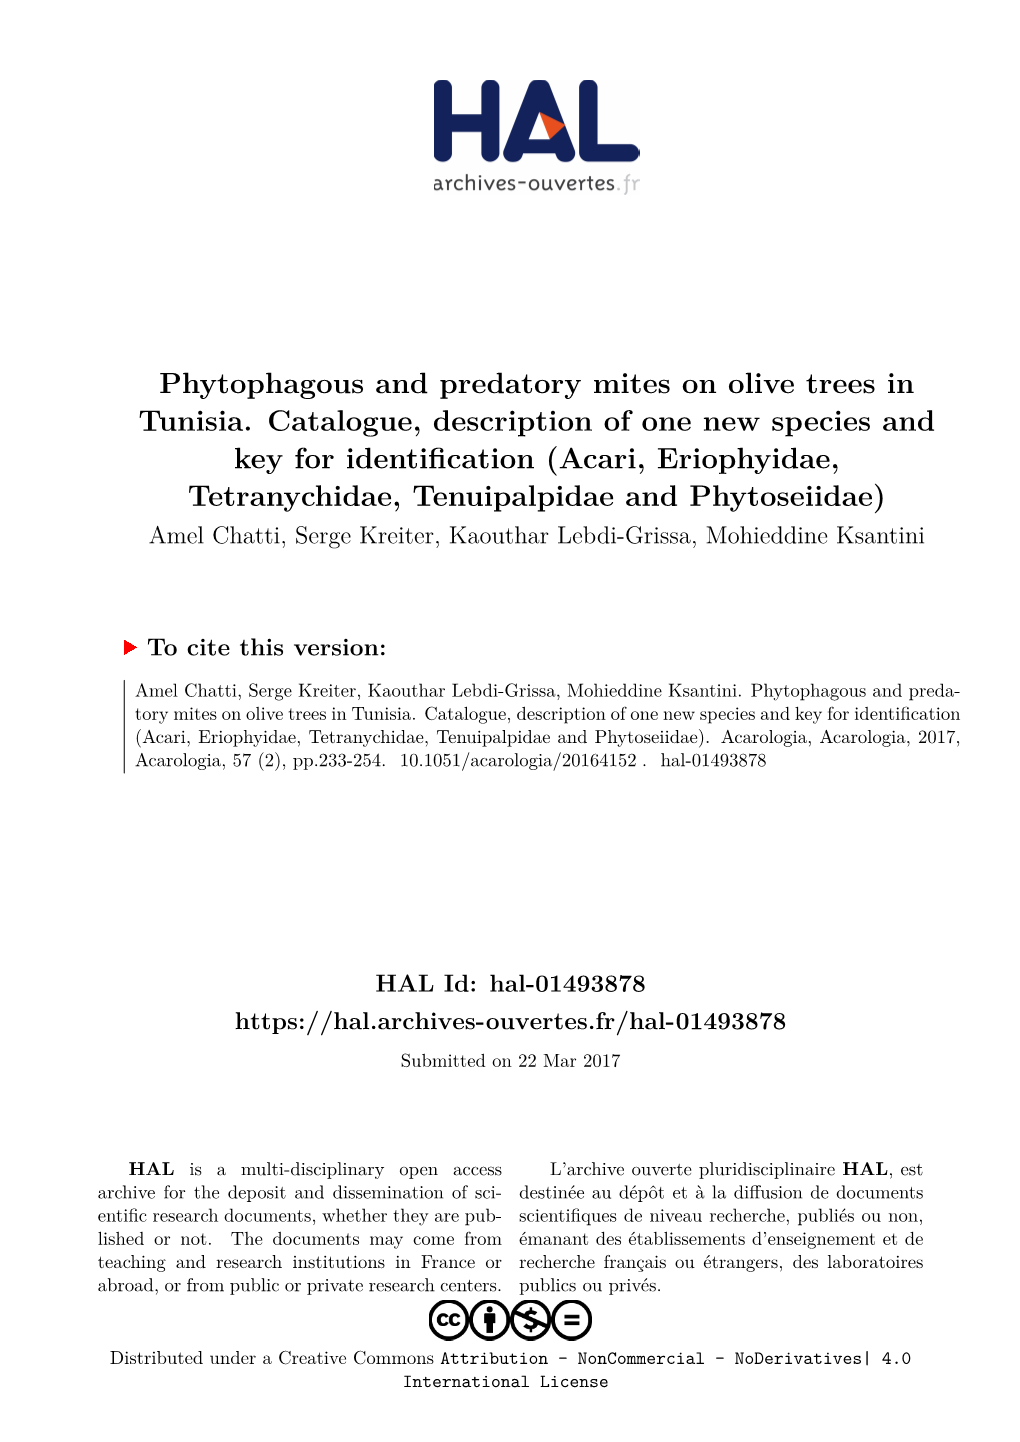 Phytophagous and Predatory Mites on Olive Trees in Tunisia. Catalogue